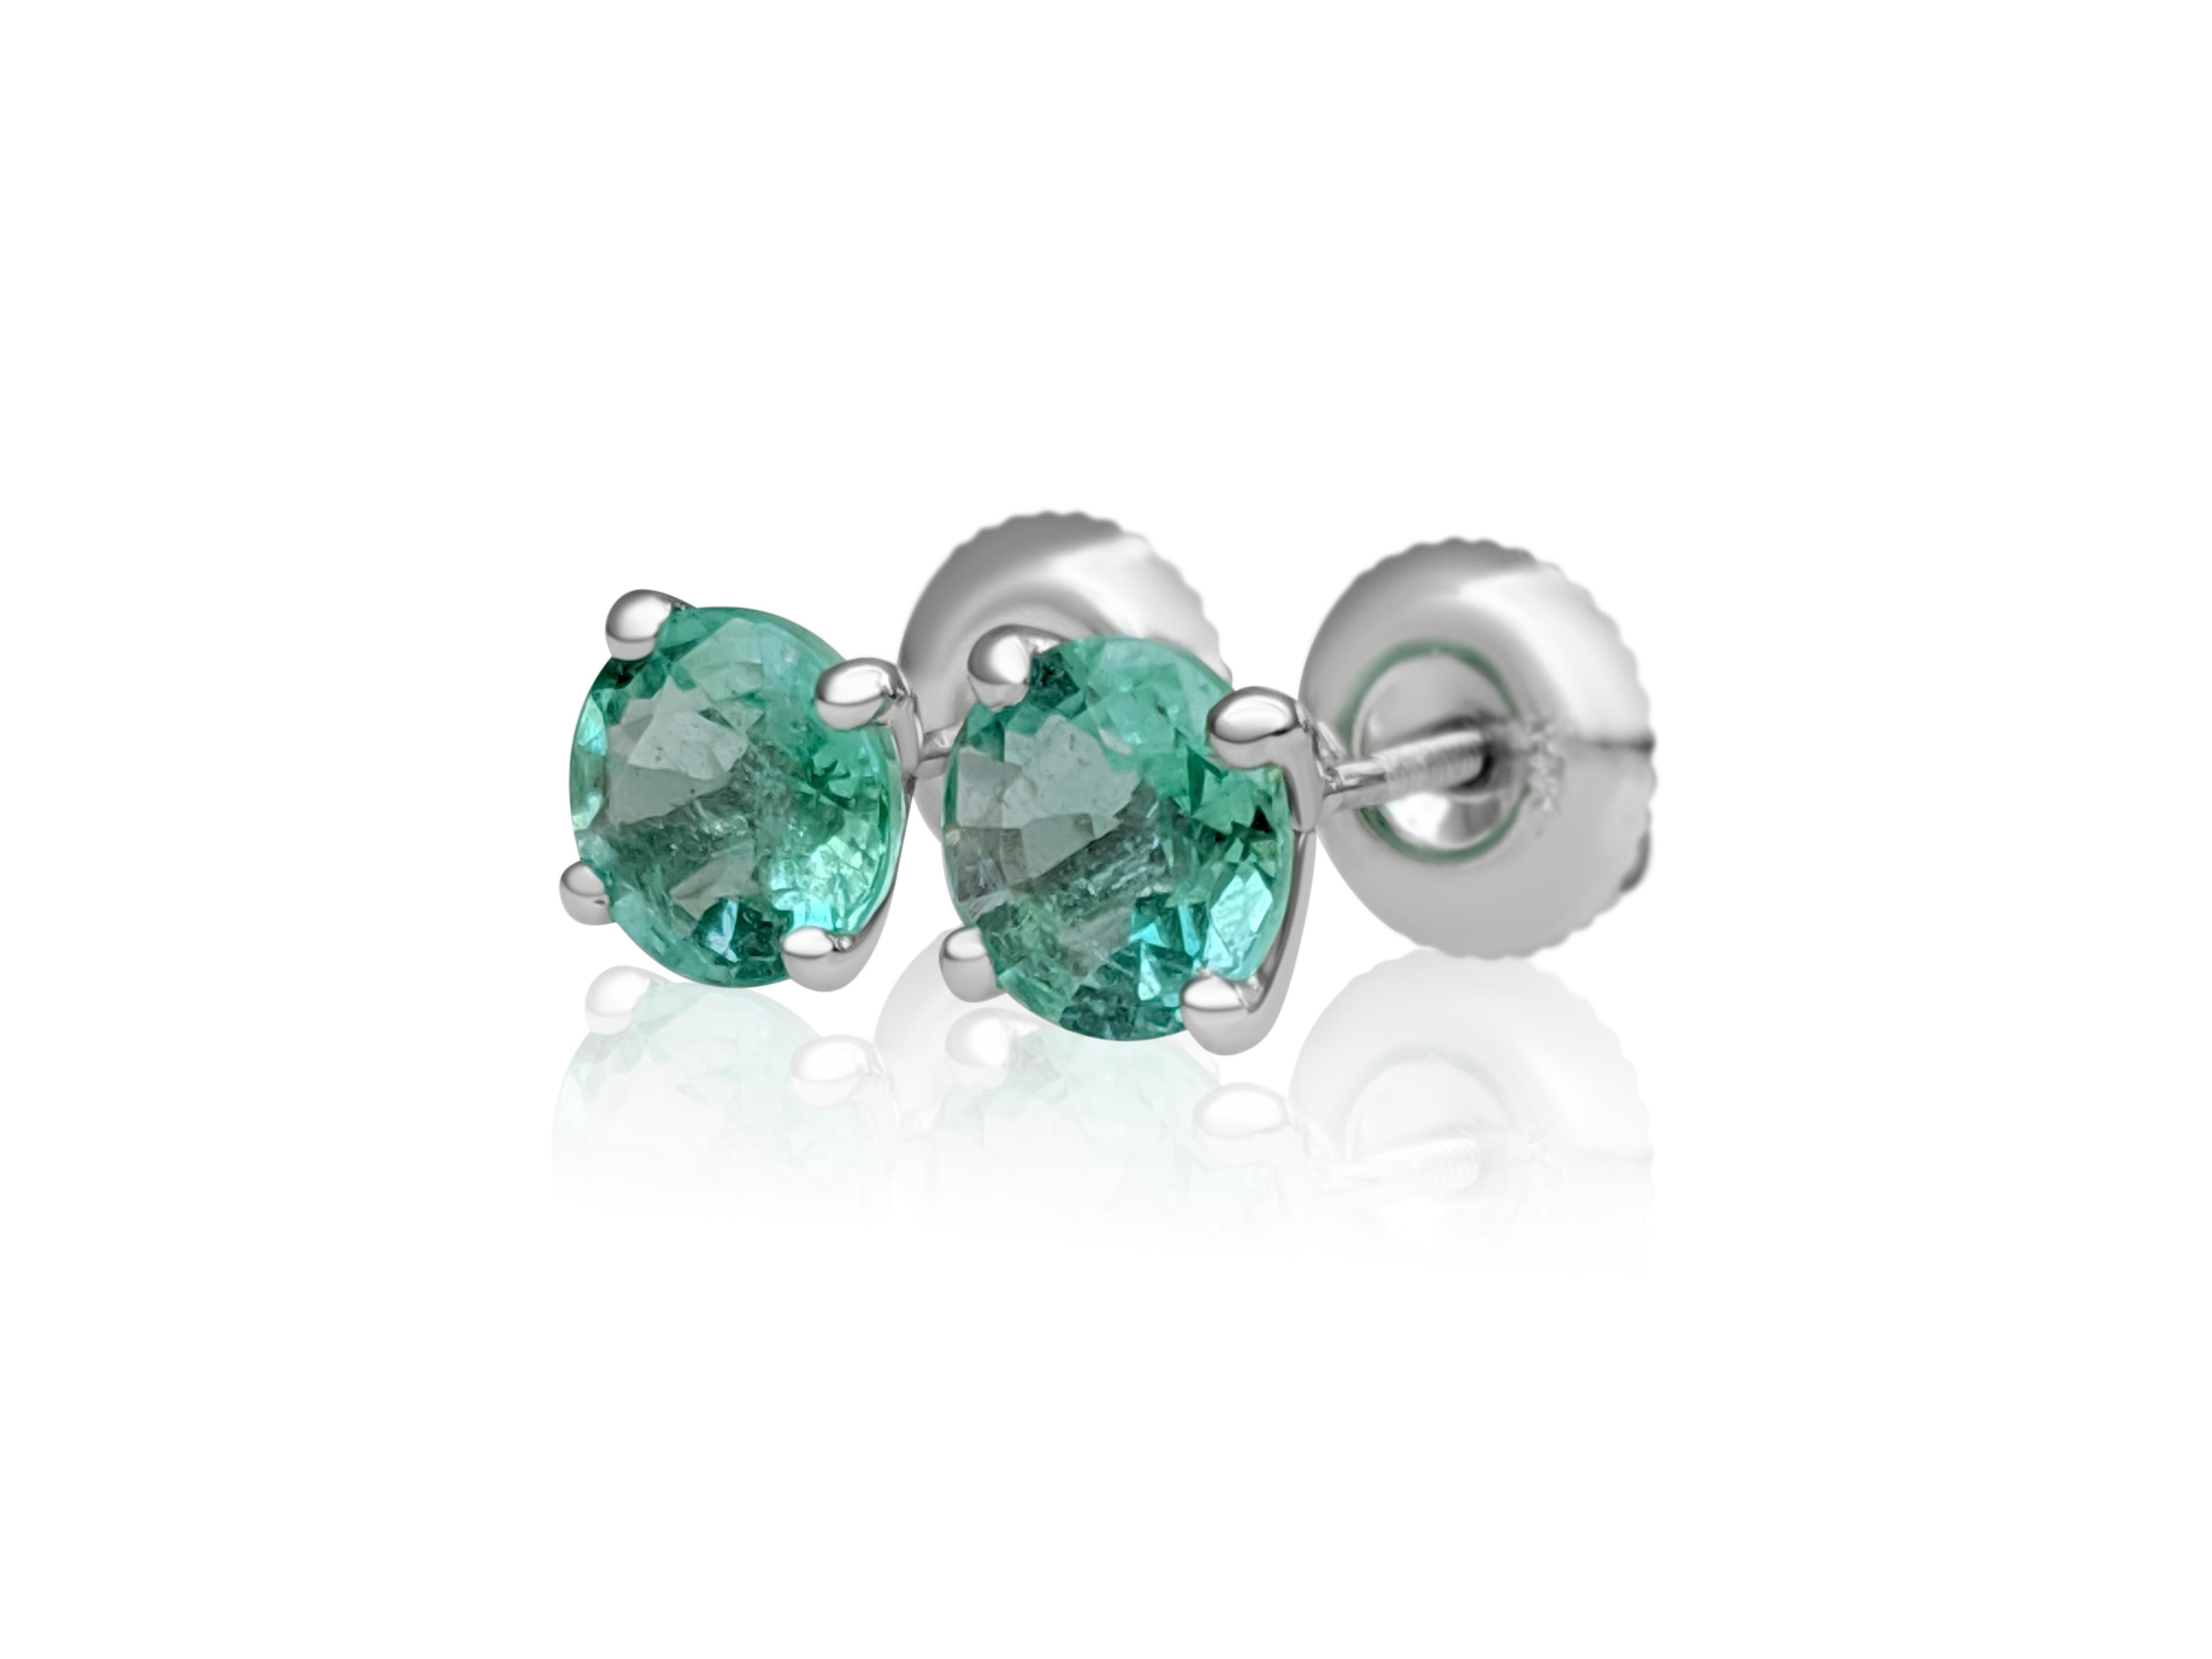 Round Cut NO RESERVE! 1.20 Ct Emerald - 14 kt. White gold - Earrings